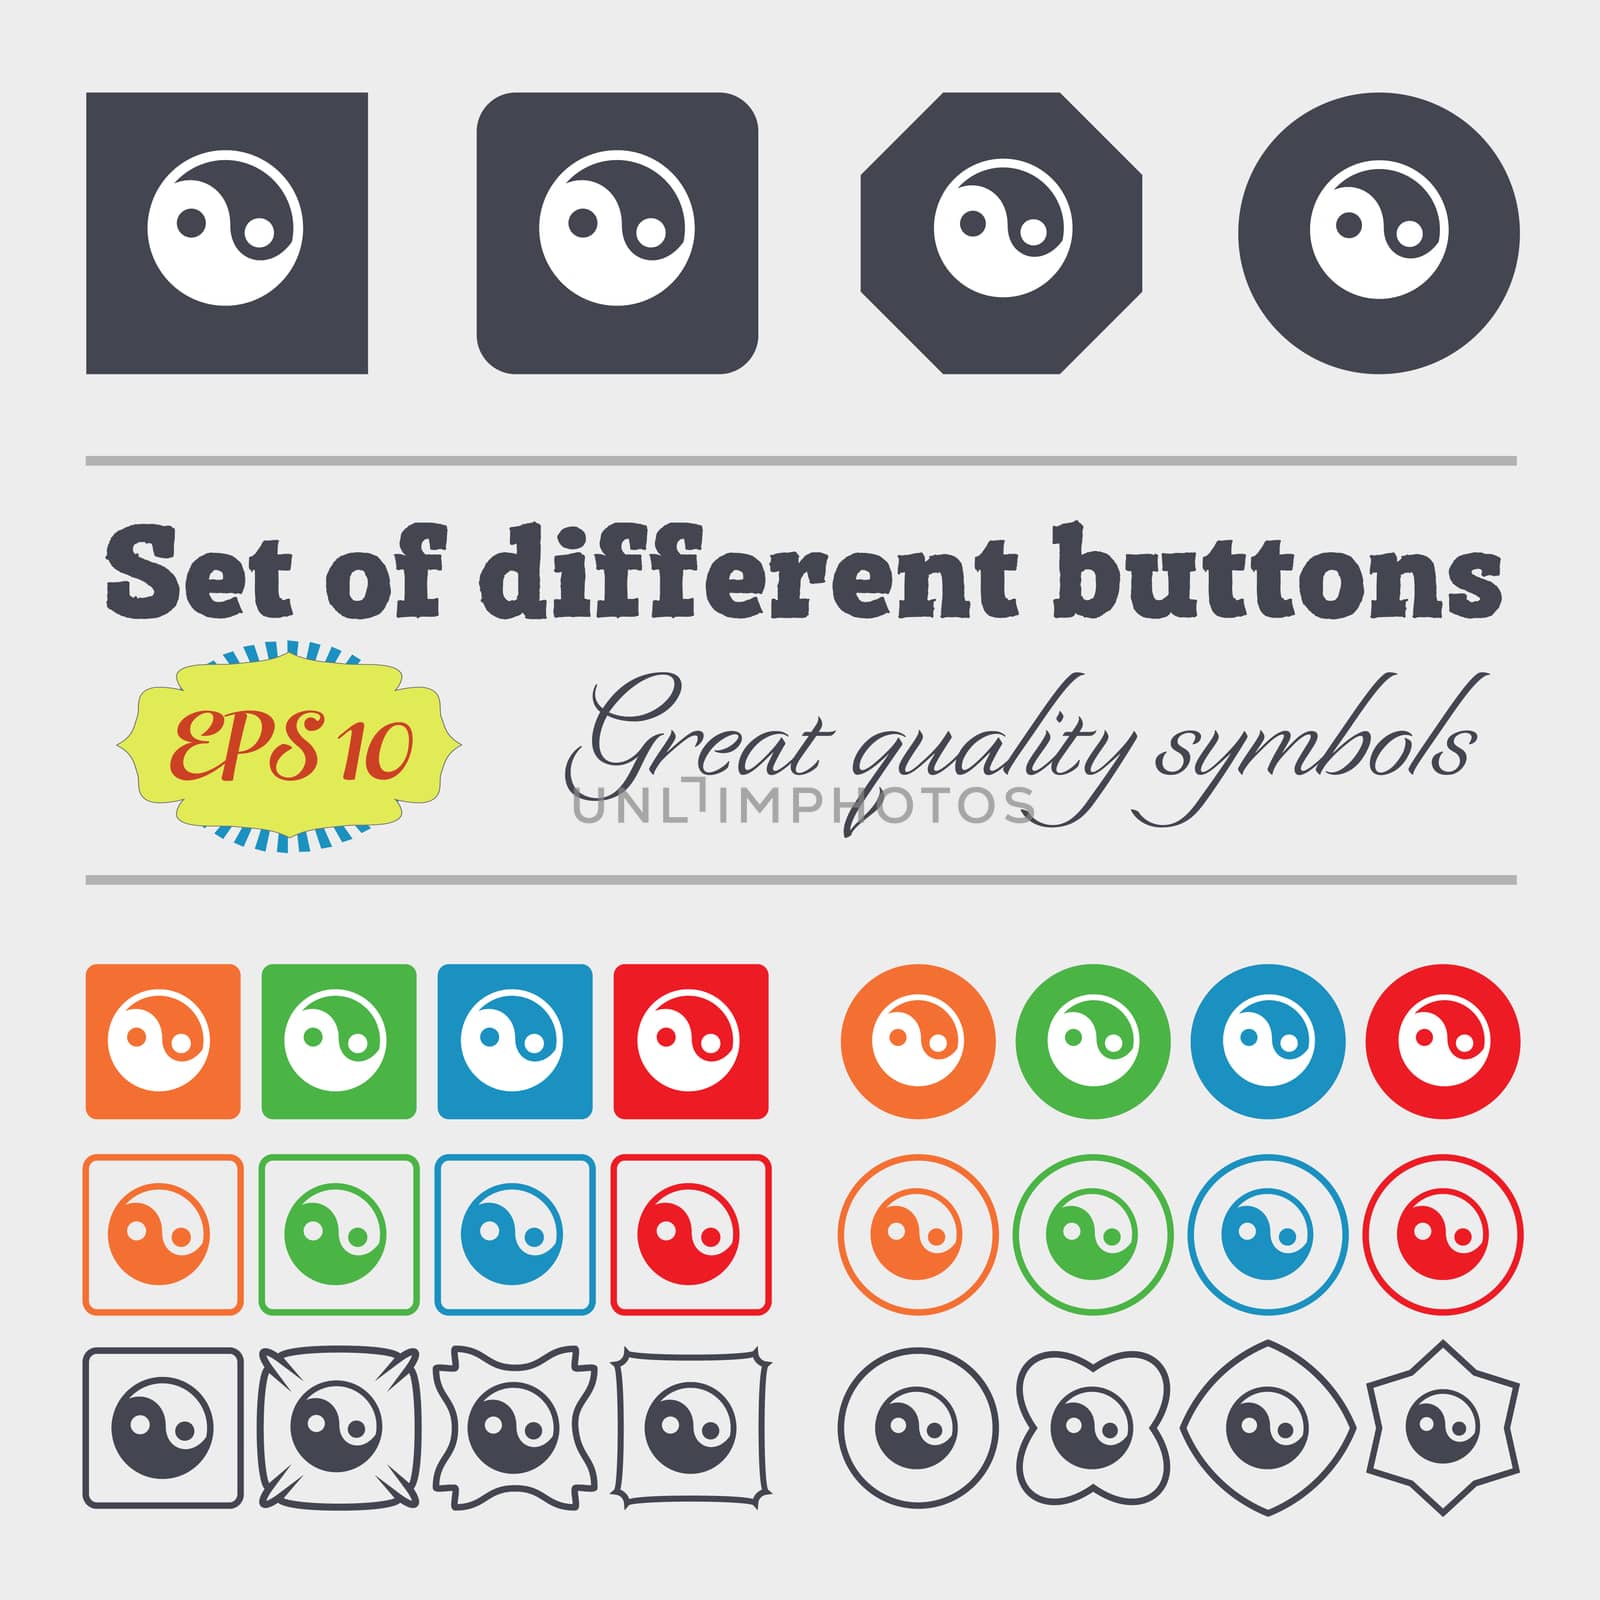 Ying yang icon sign Big set of colorful, diverse, high-quality buttons. illustration